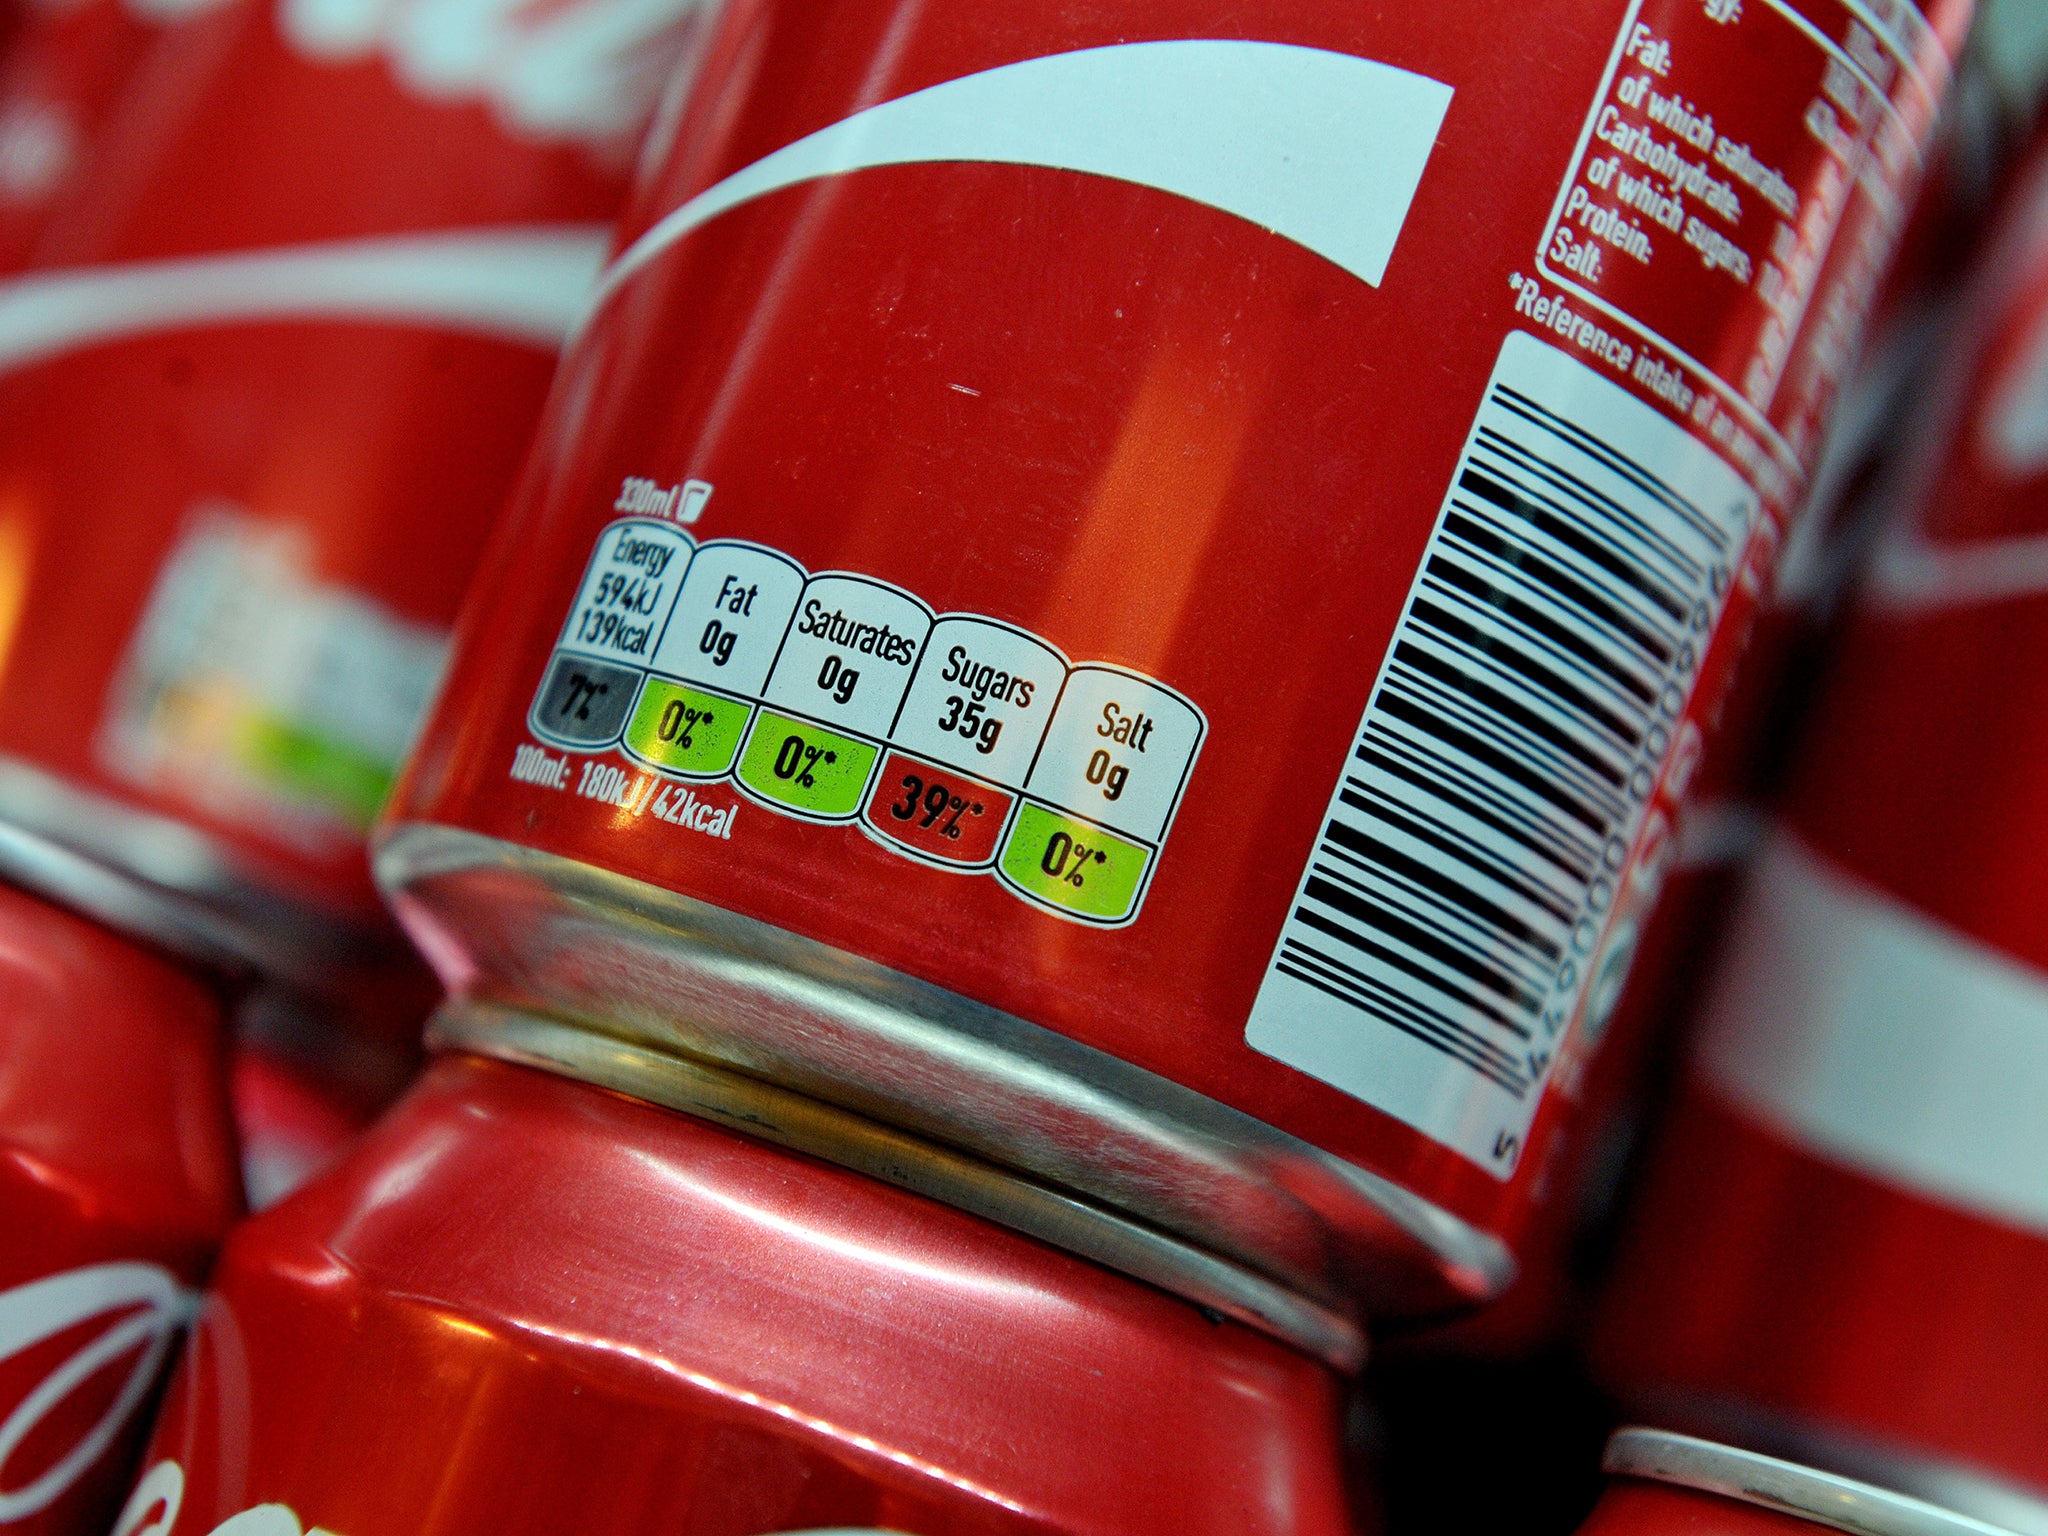 Cans of Coca-Cola which would currently fall within the higher rate of the sugar tax